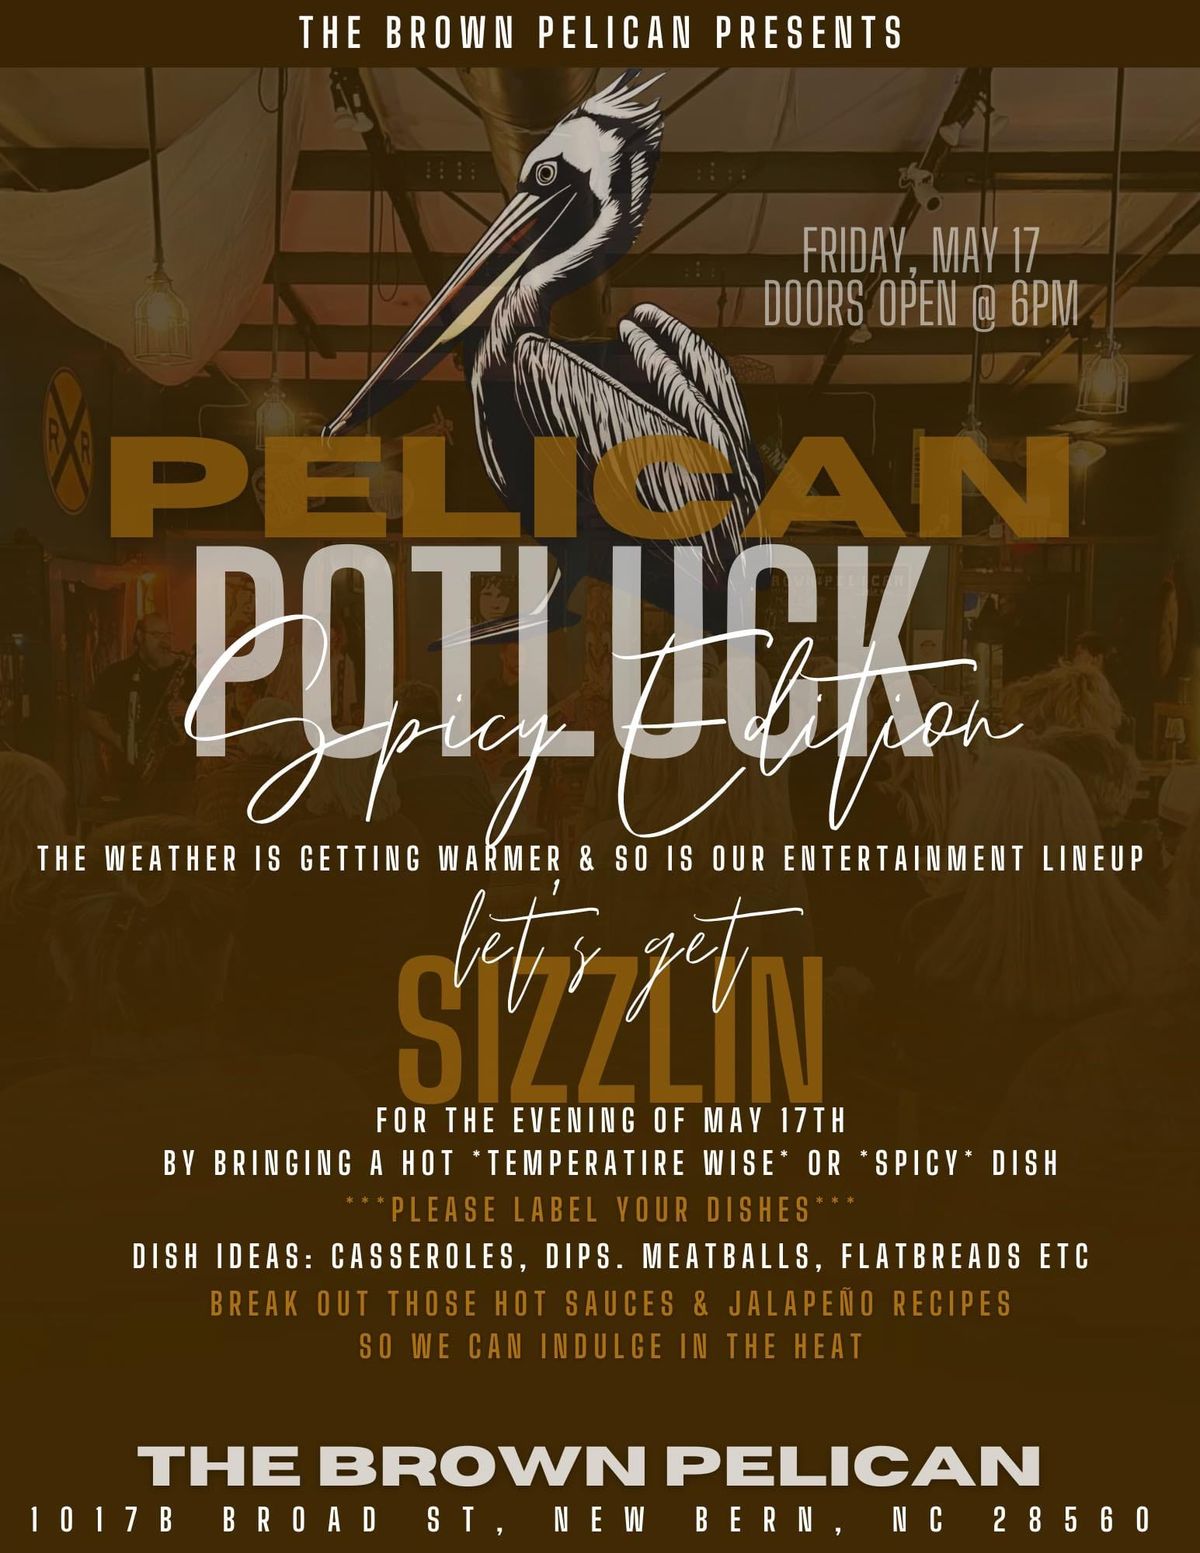 Pelican Potluck - Spicy Edition\ud83d\udd25at The Brown Pelican!